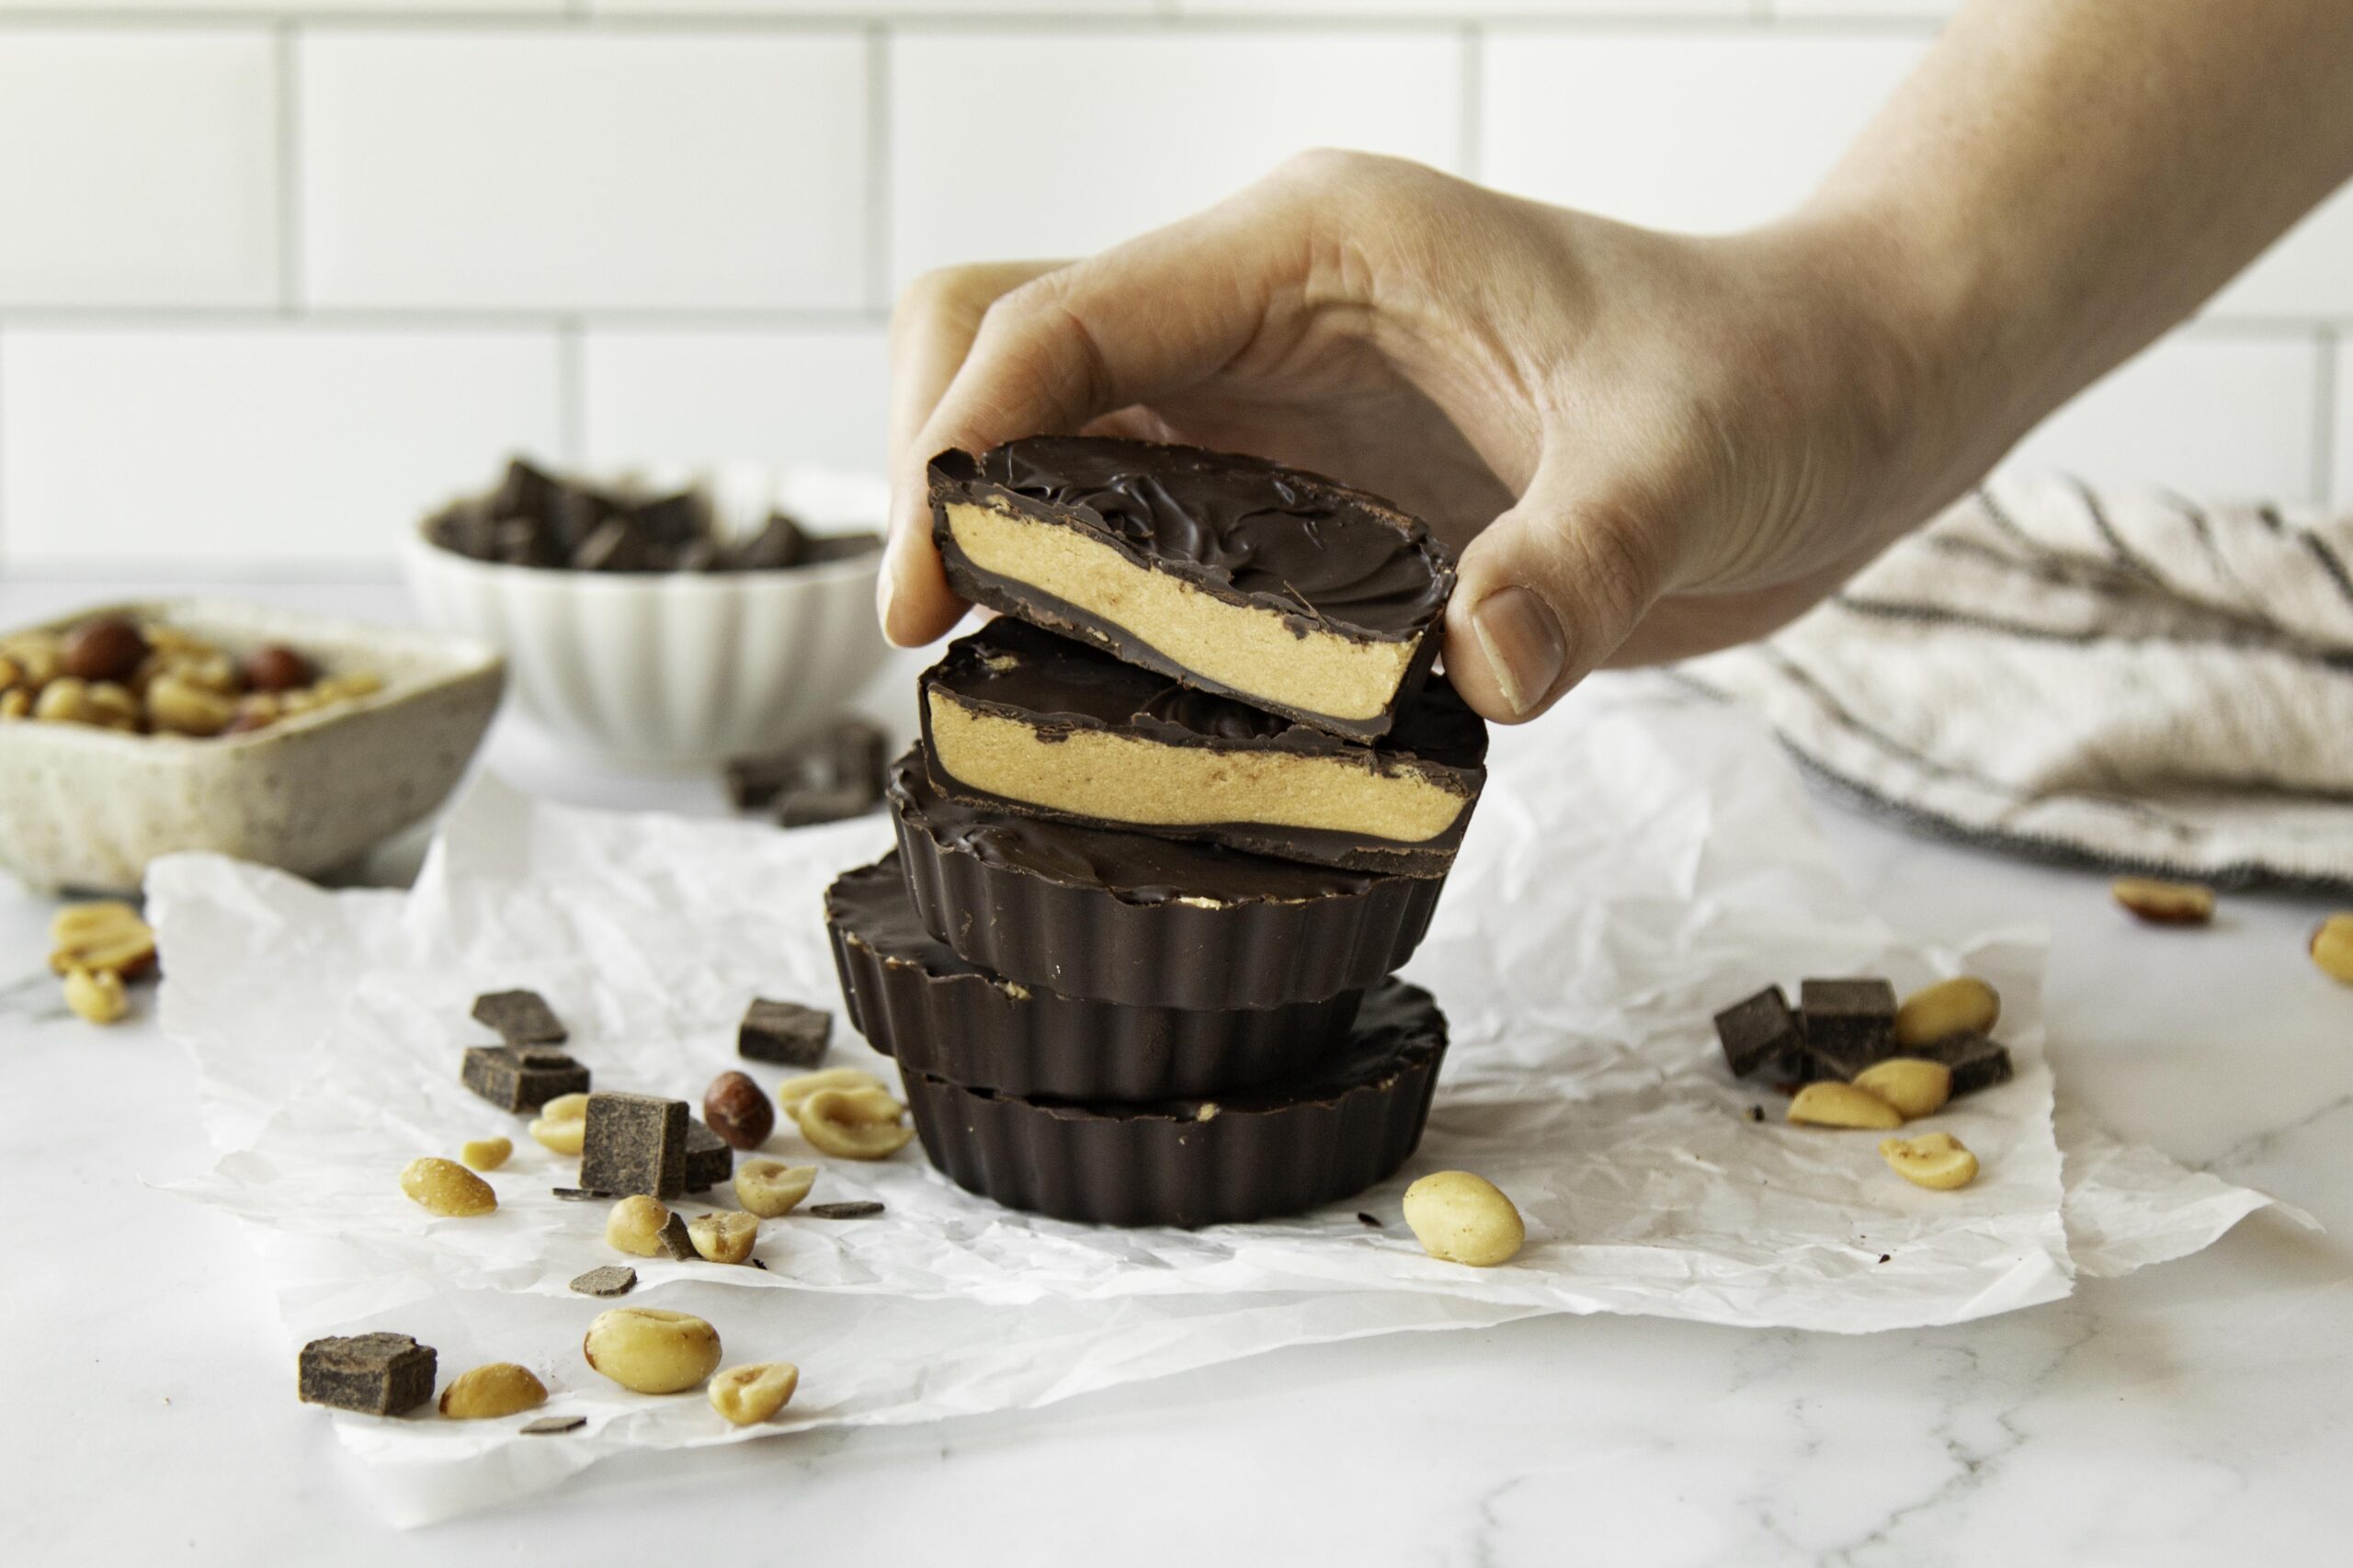 reese's peanut butter cup homemade recipe